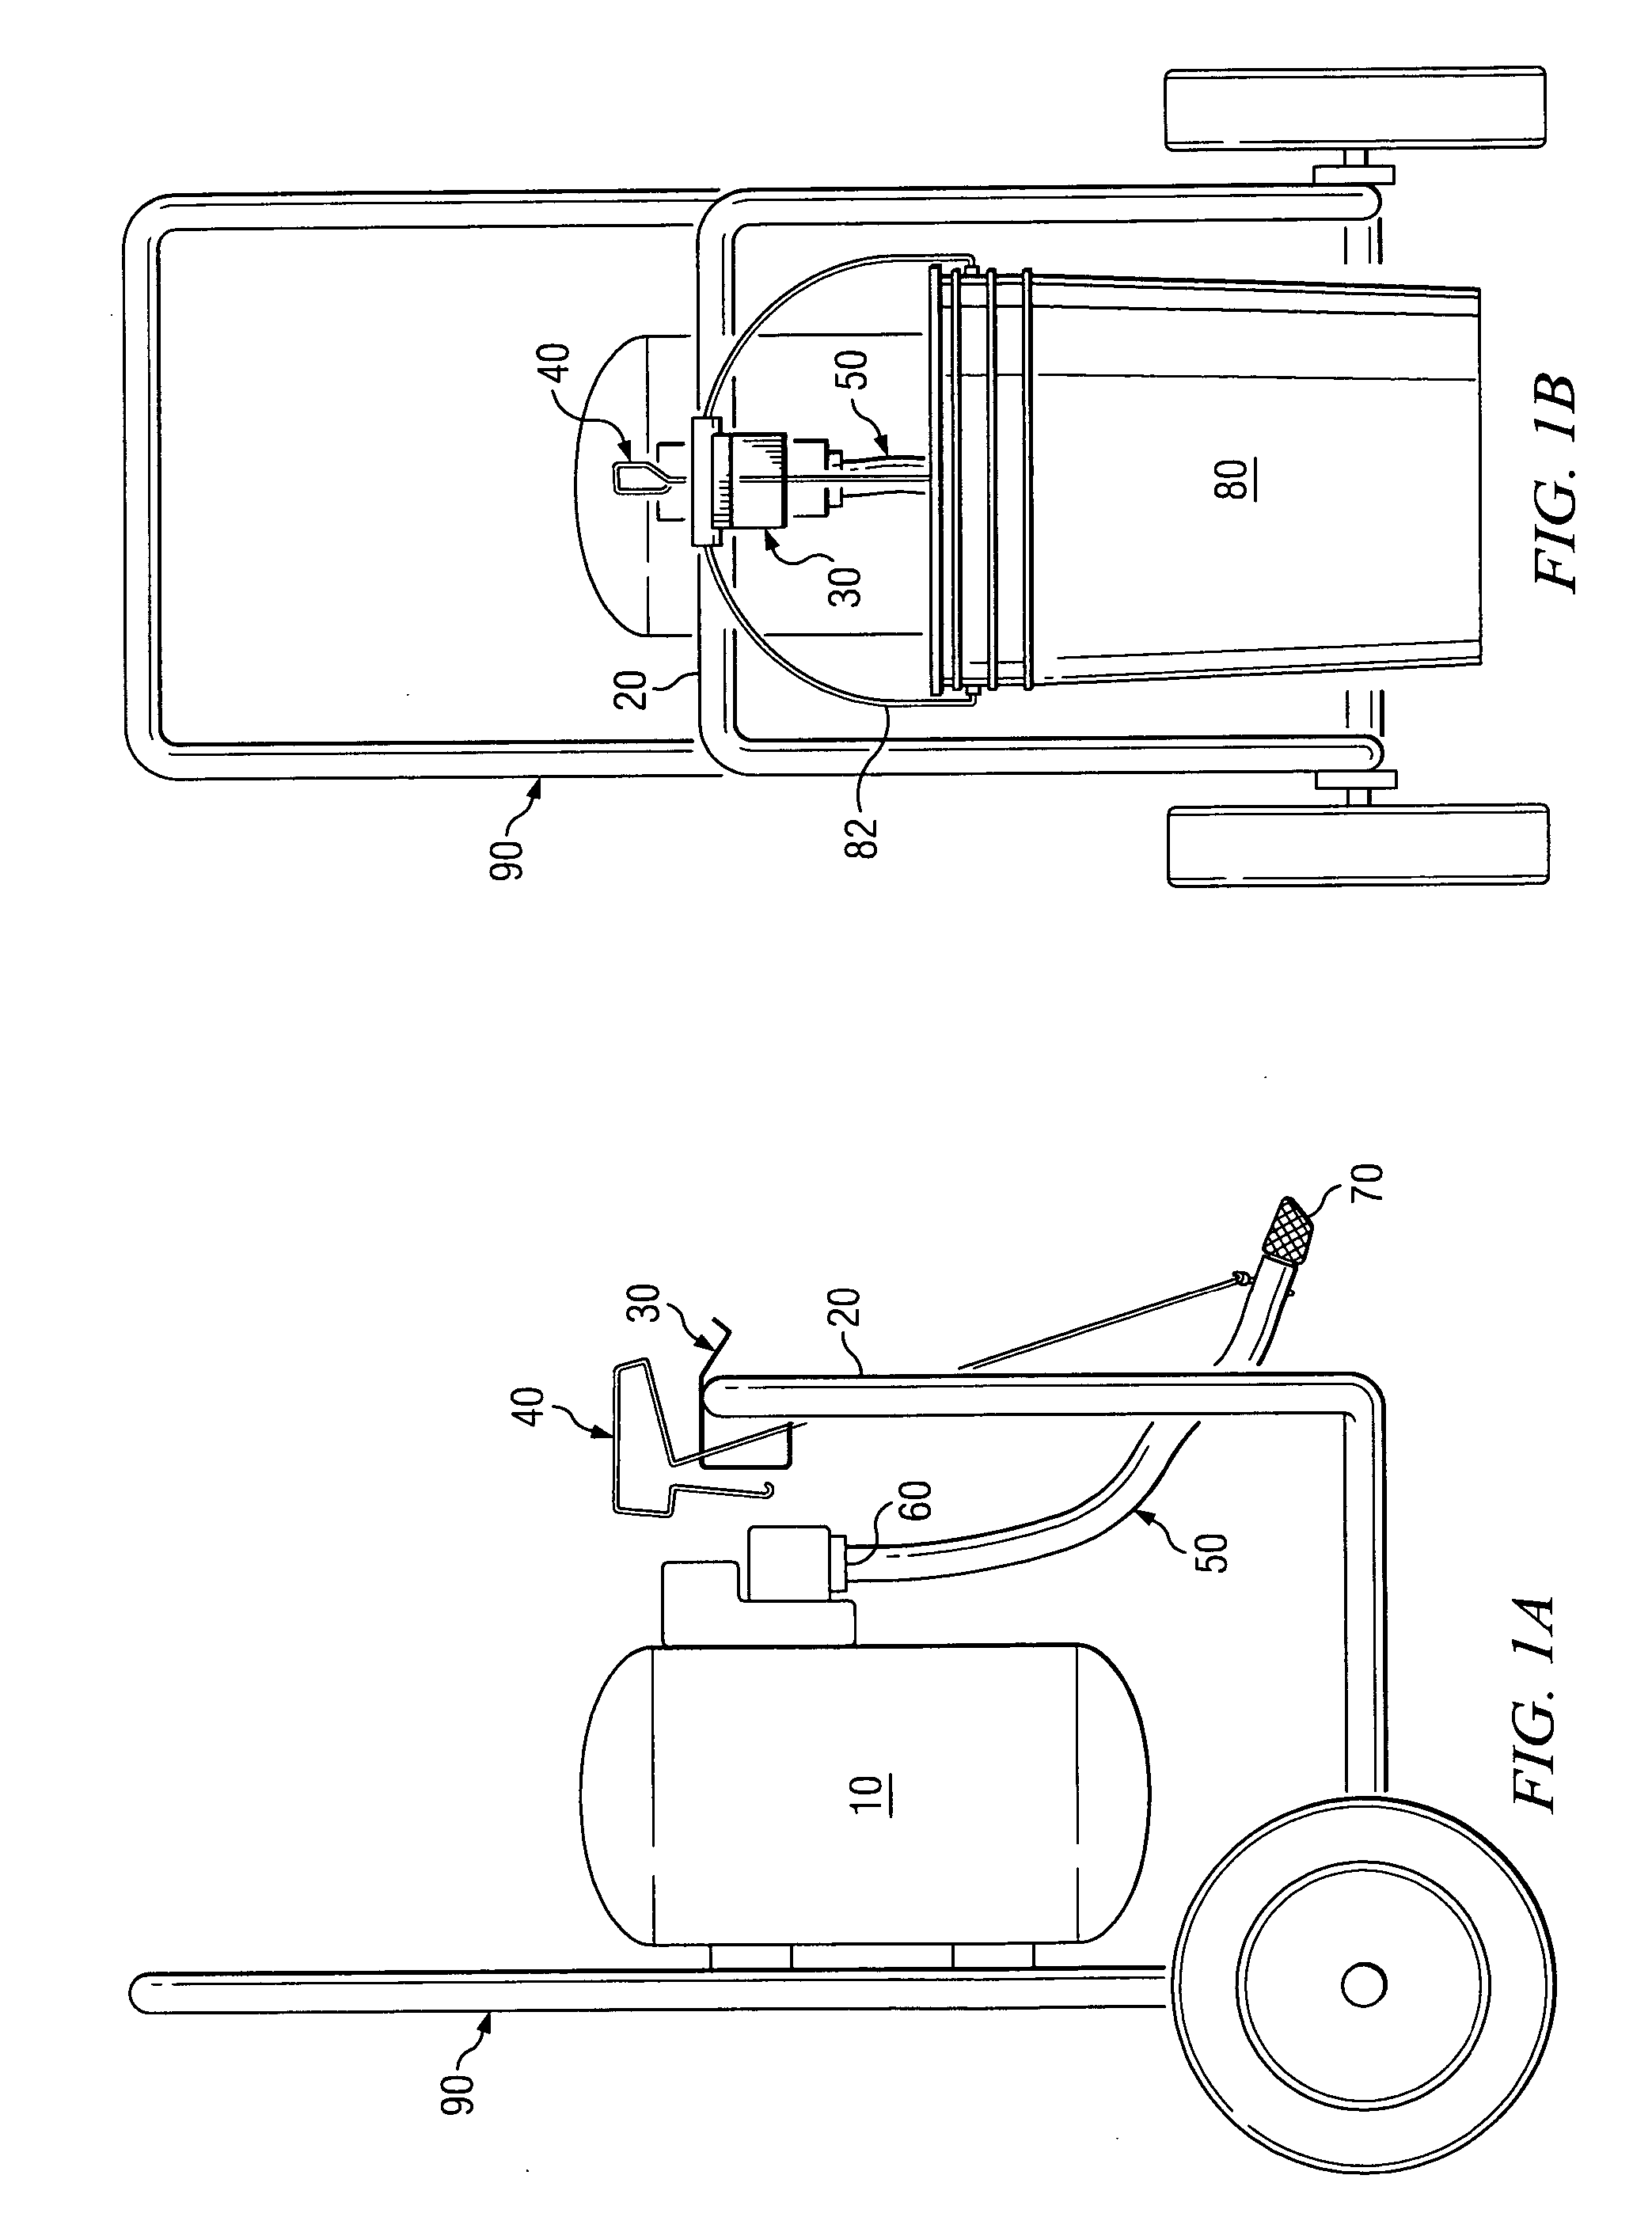 Apparatus and method for efficient dispensing of fluids from a container